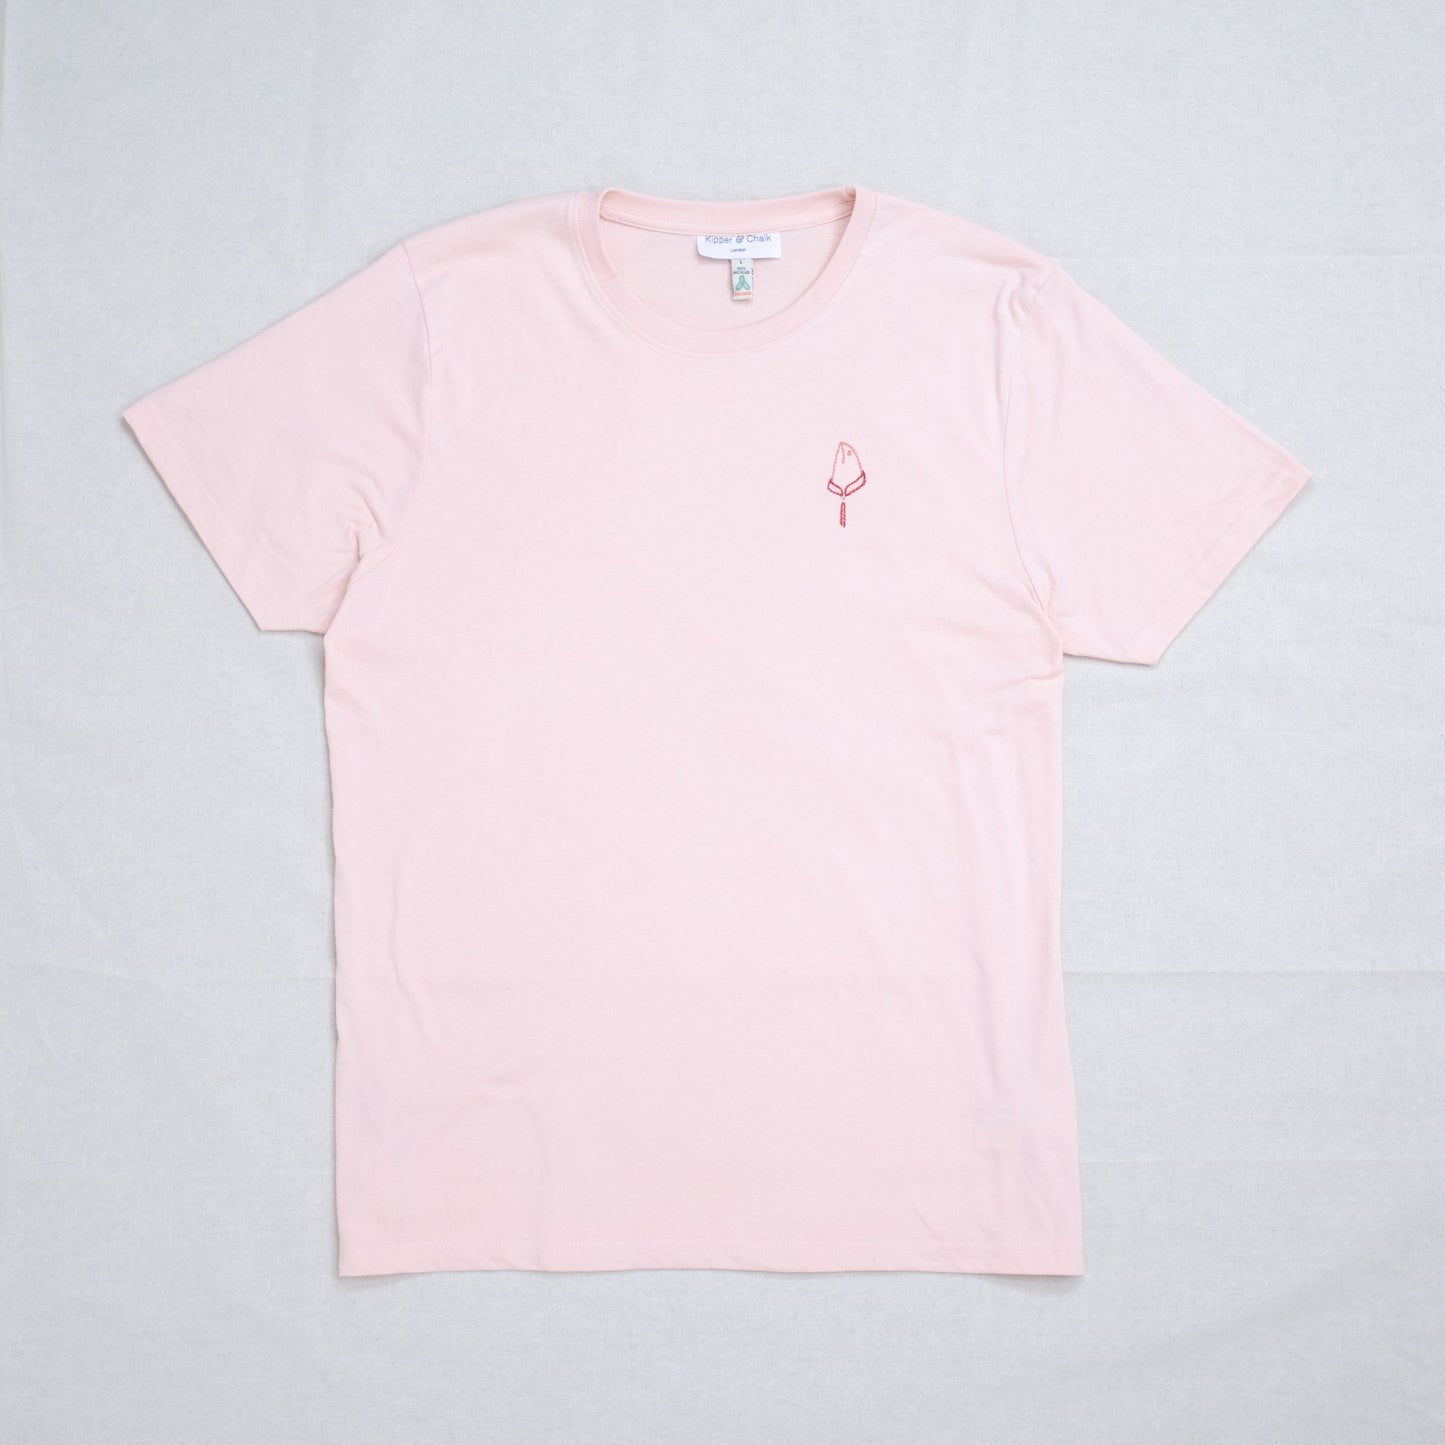 Embroidered T-Shirt - Salmon